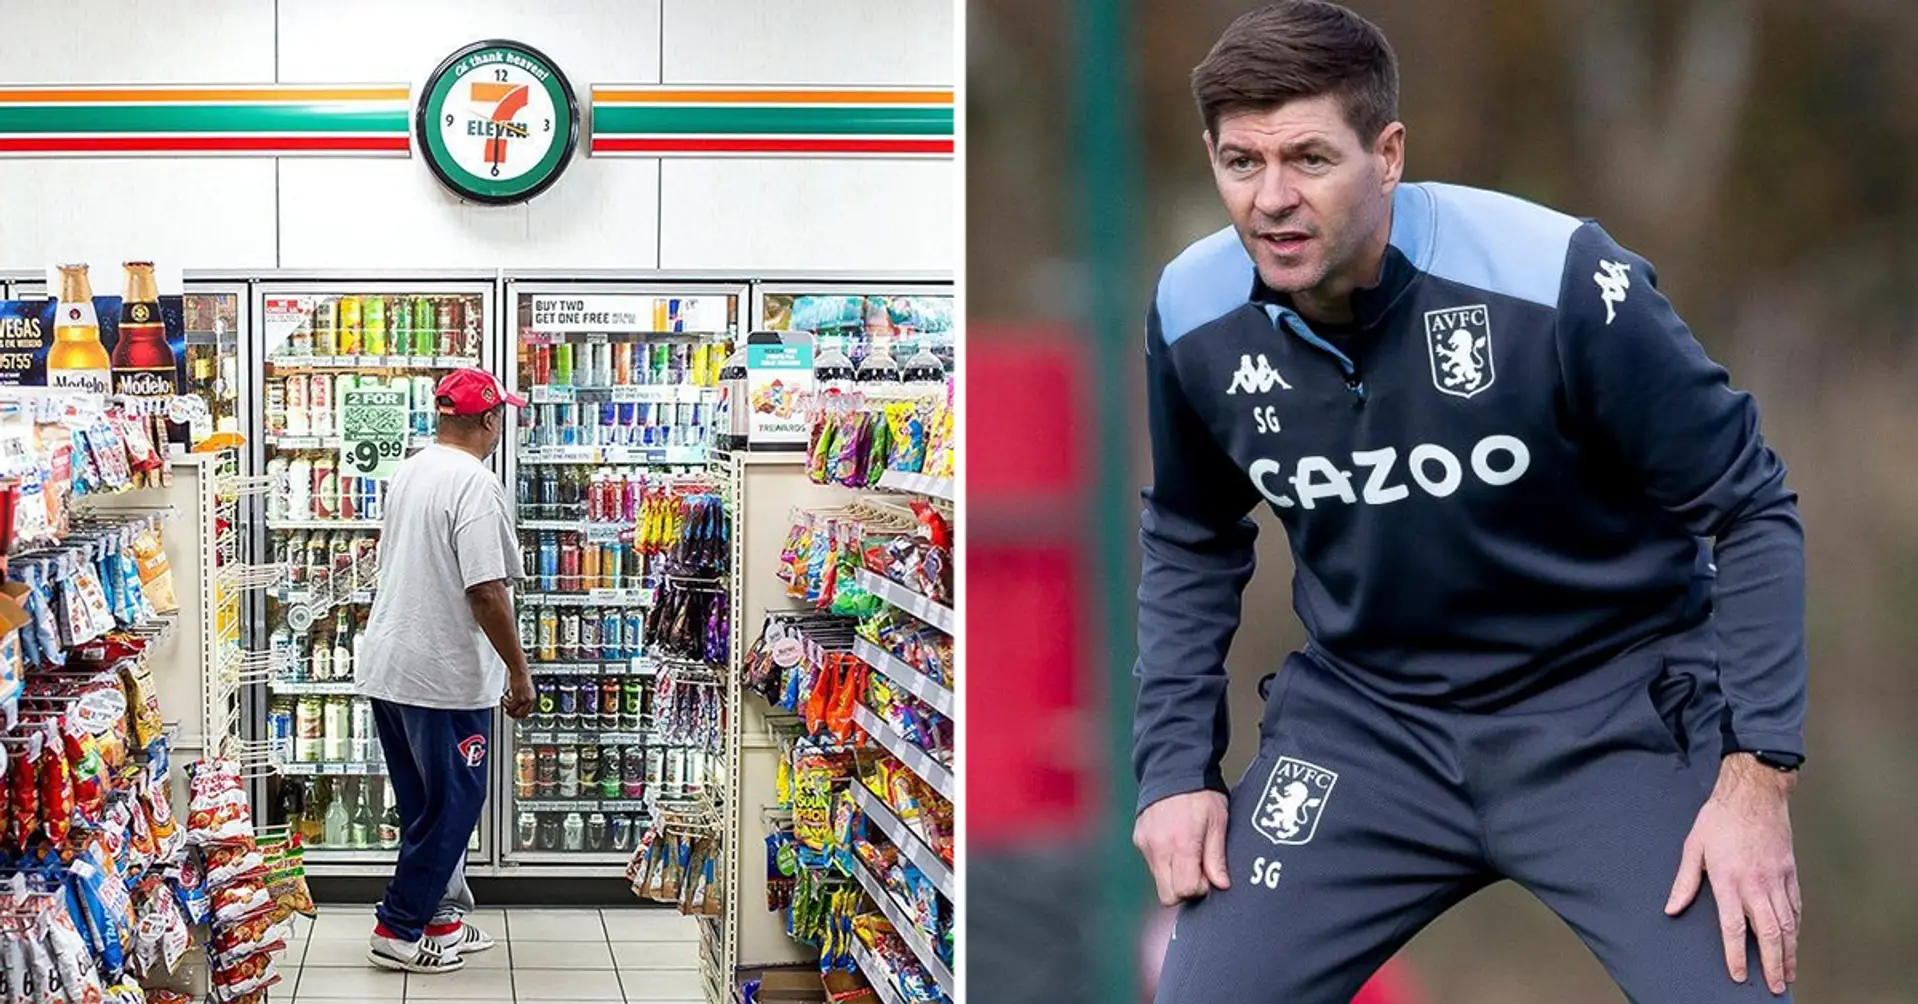 Steven Gerrard banned 4 more products at Aston Villa – full list revealed